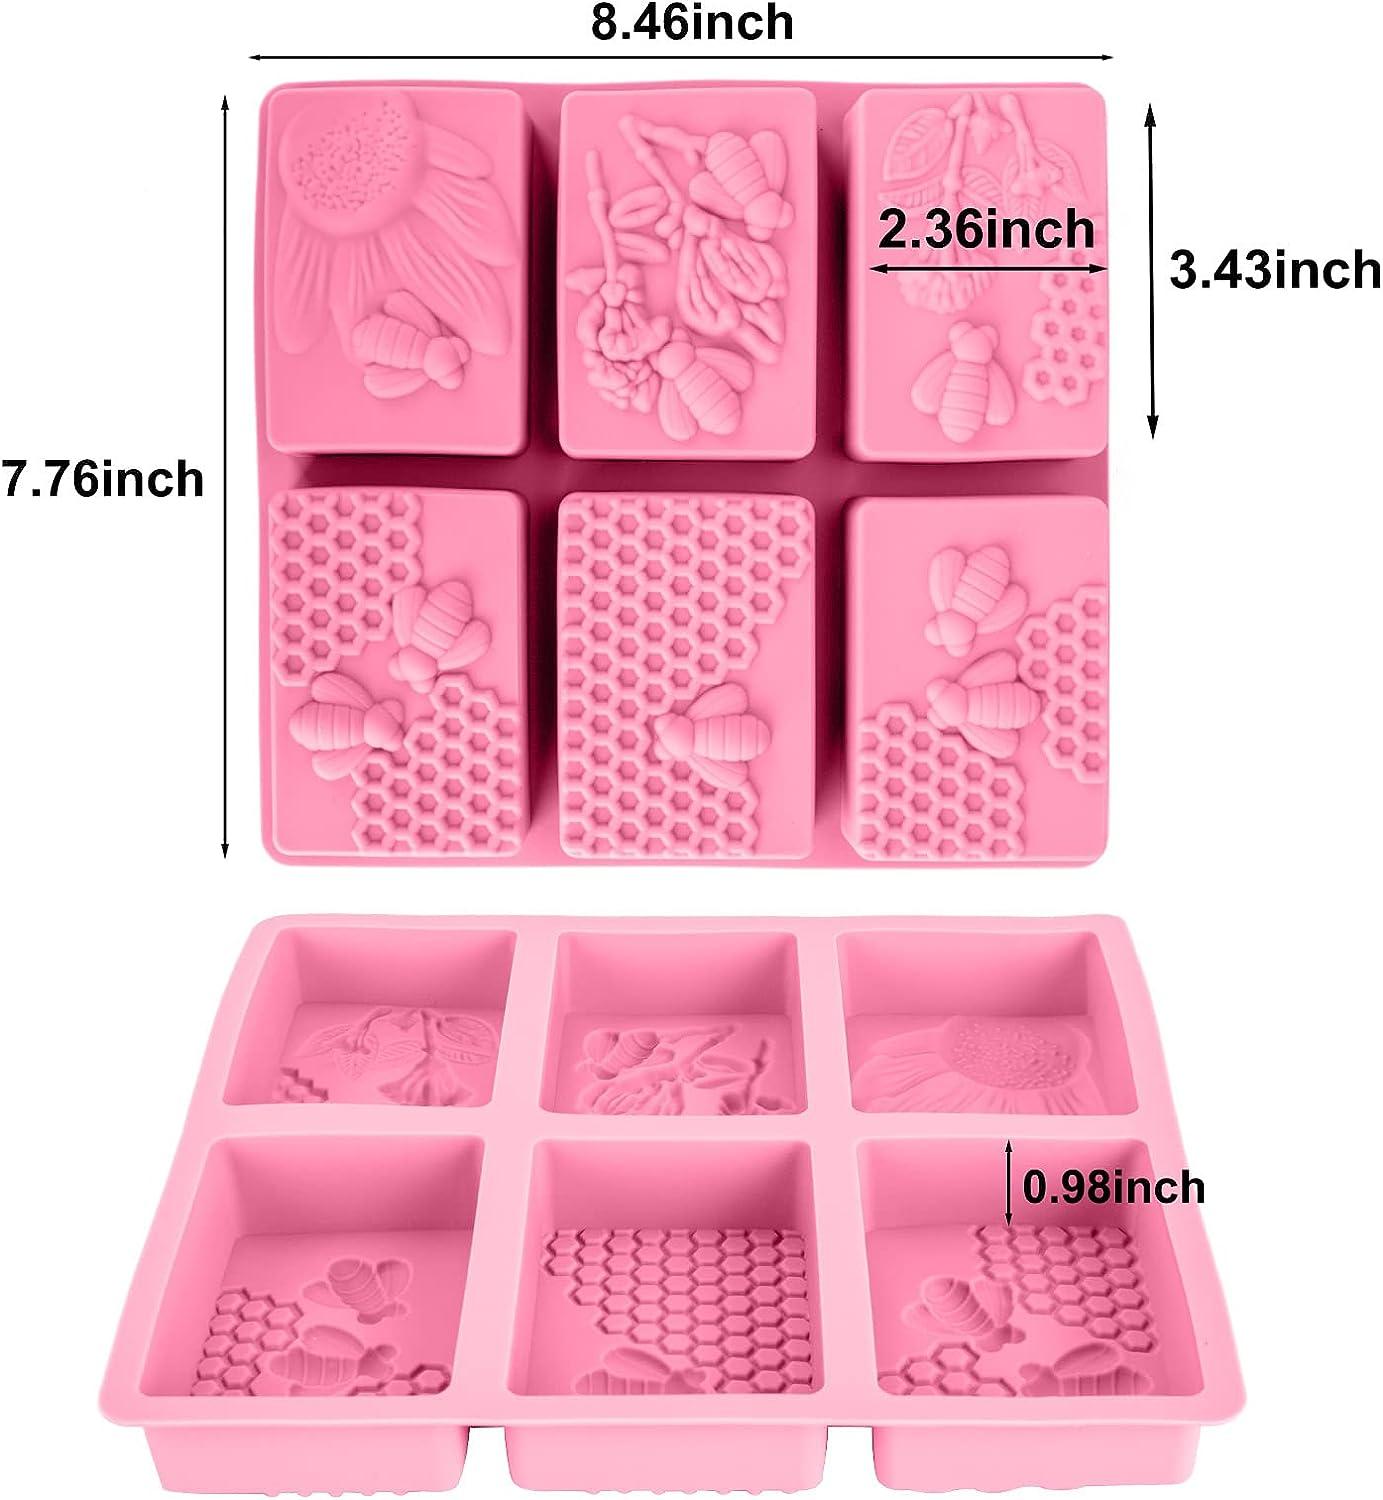 6 Cavity Honey Bee Silicone Soap Mold, Soap Making, Honey Comb, DIY Project  Molds, Handmade Soap, Pink Colour, Rectangular Mold, Food Safe 